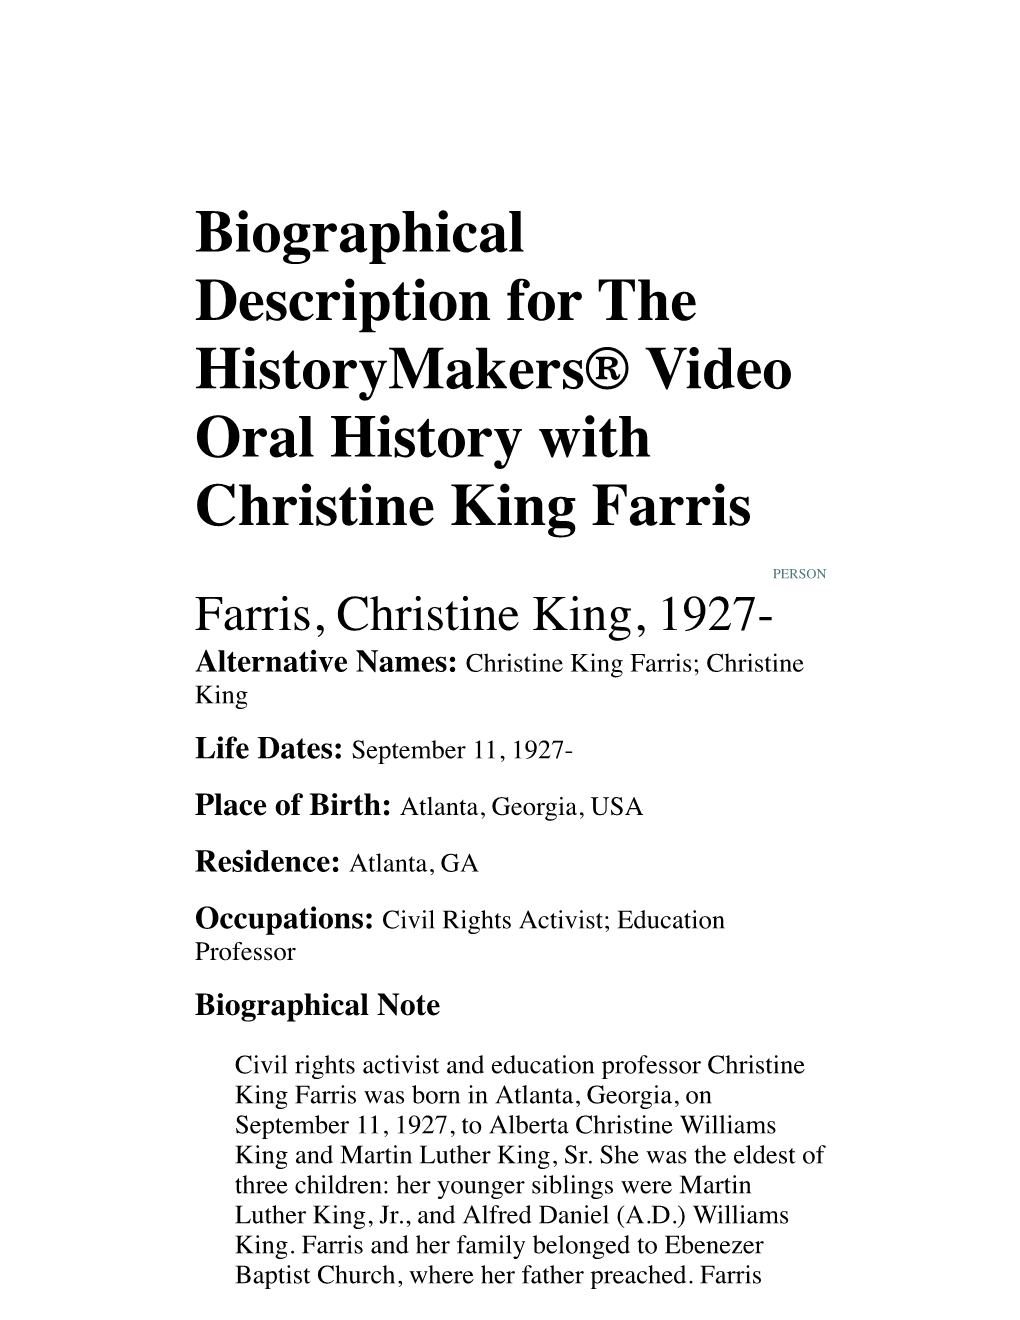 Biographical Description for the Historymakers® Video Oral History with Christine King Farris